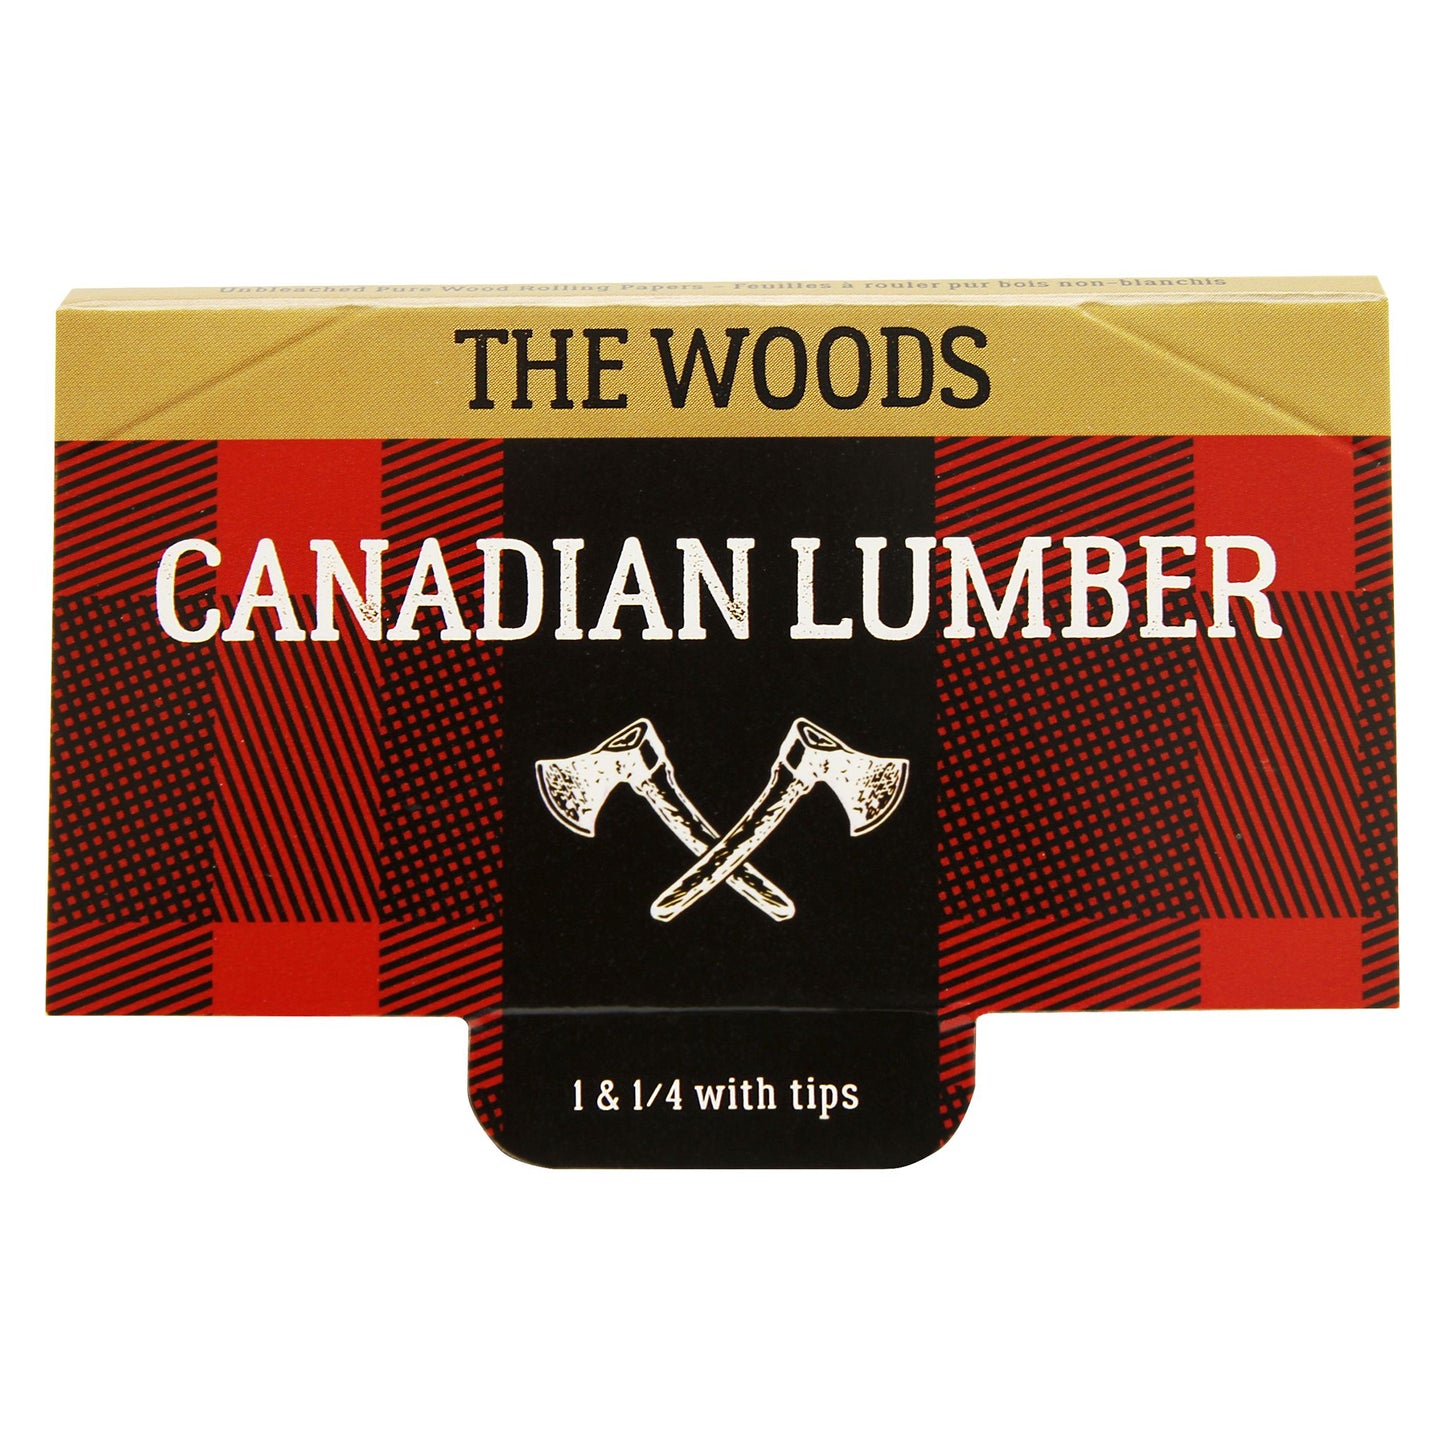 Canadian Lumber - Woods Unbleached Pure Wood Rolling Papers with Tips